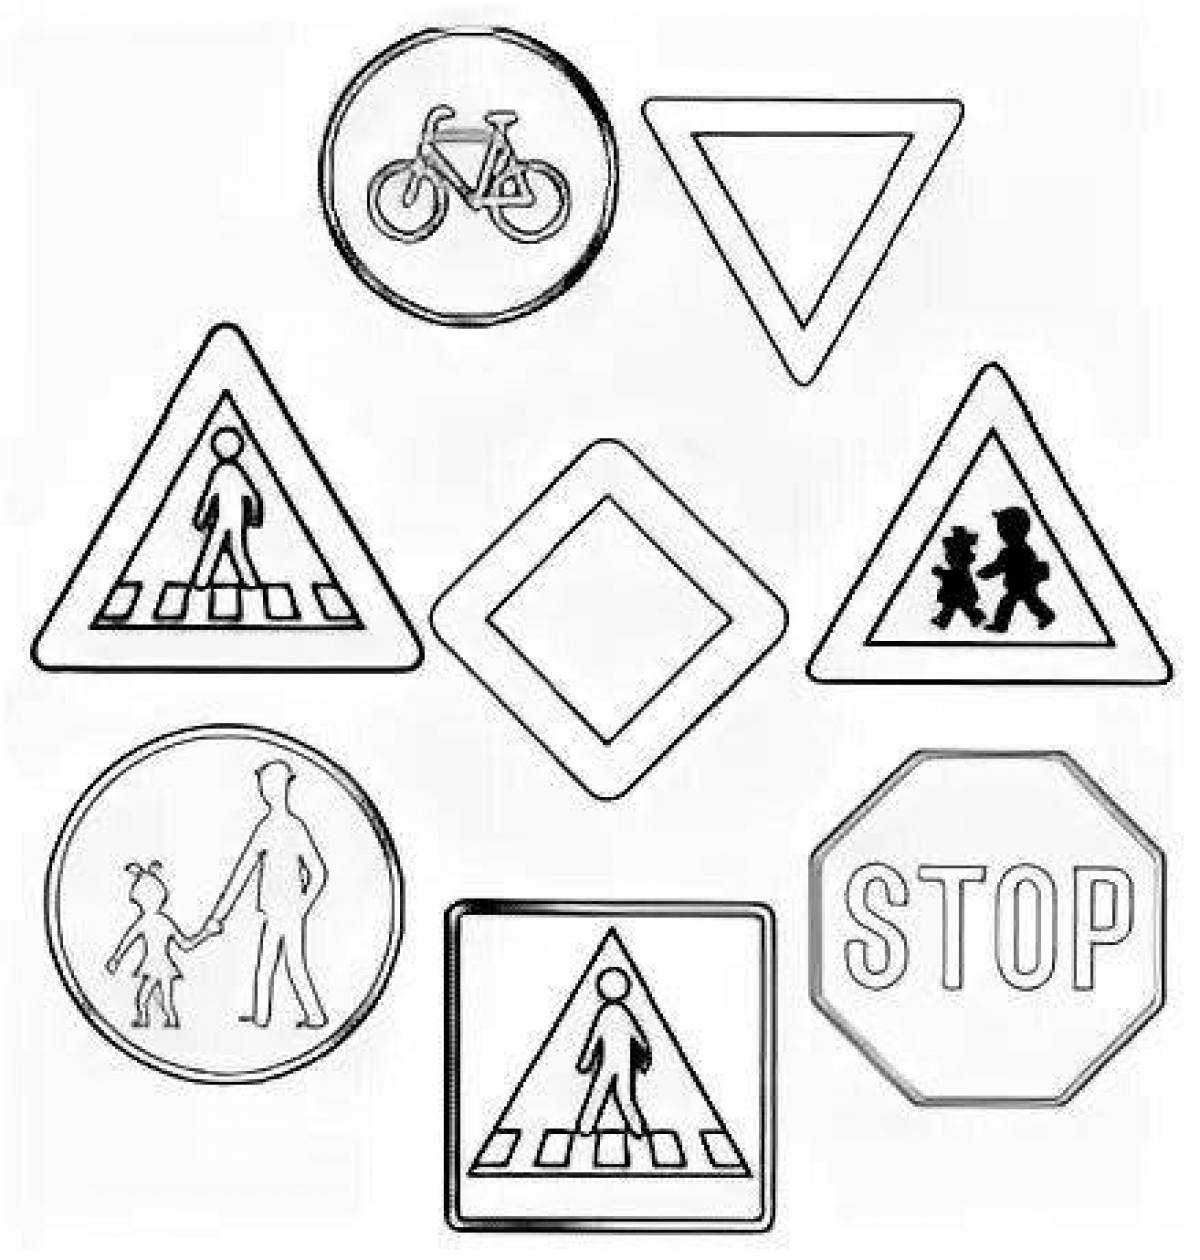 Coloring page glorious roadwork sign